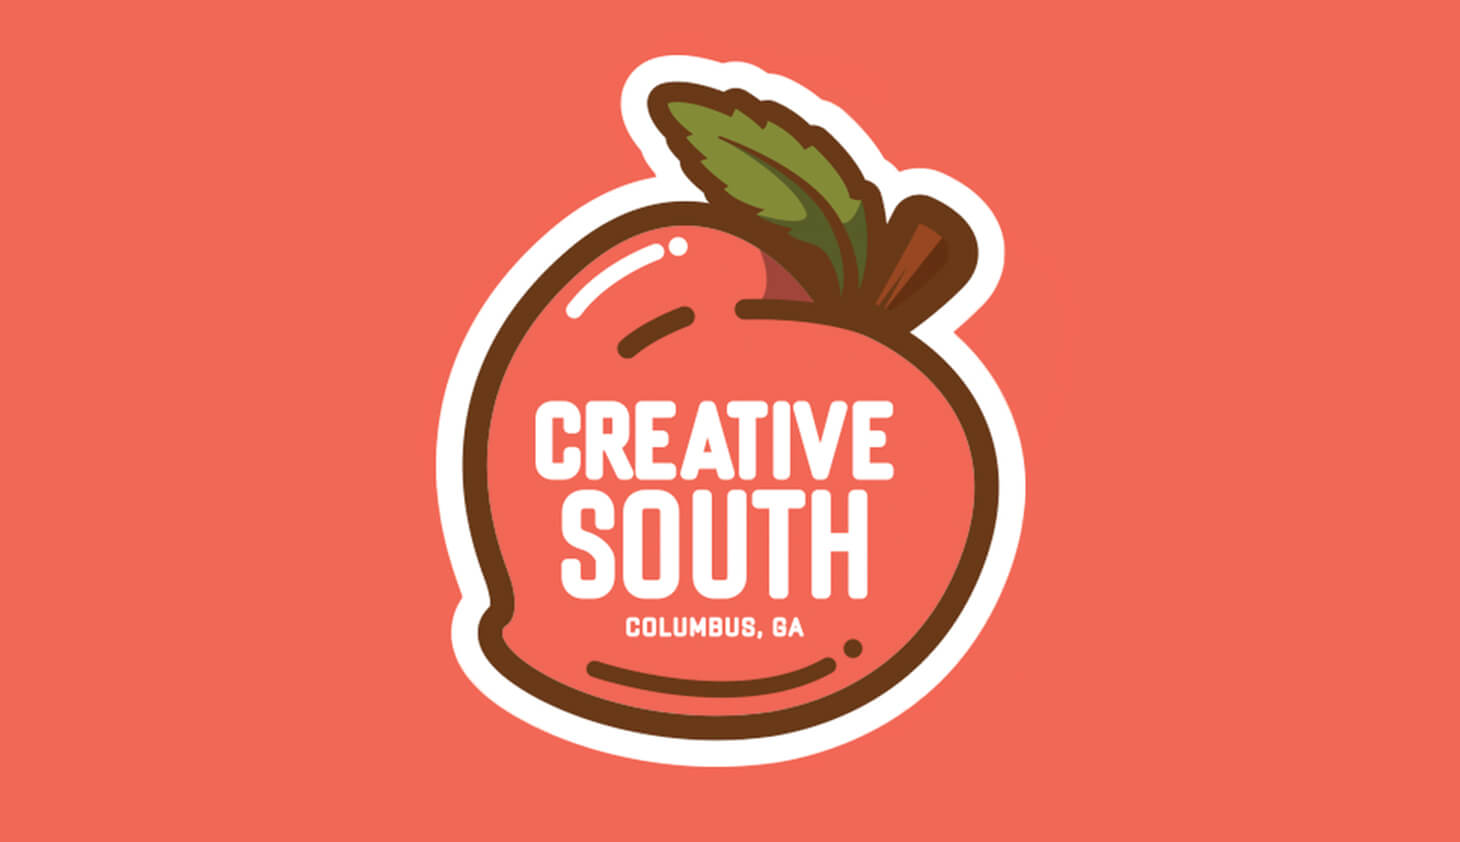 Creative South design conference